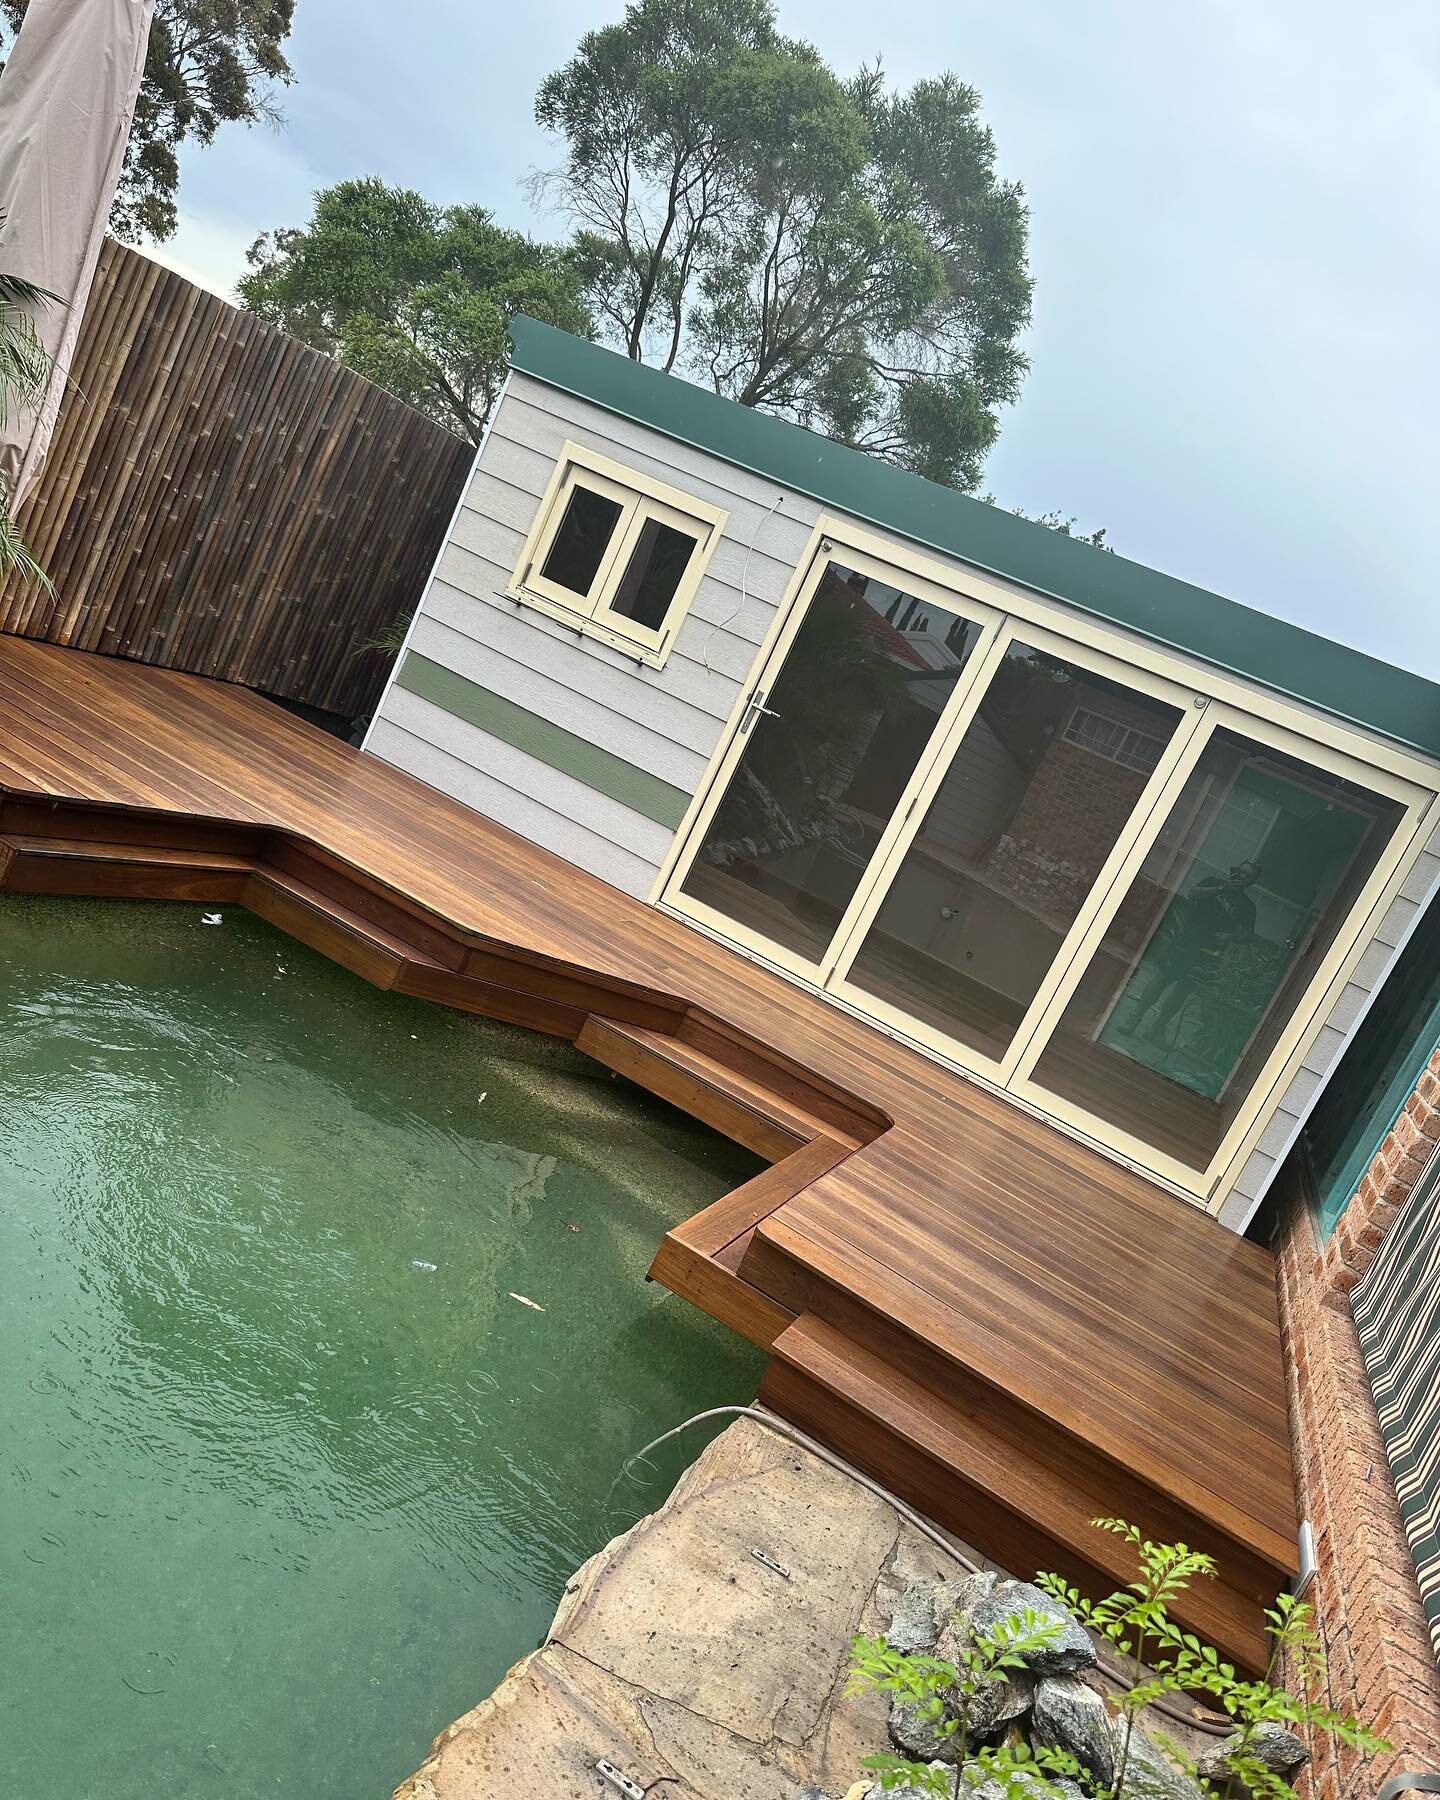 🏝️ Pool house/ outdoor kitchen complete with Australian Hardwood Deck shaped to the pool. Bifold doors and window.

✅Bali Huts, decks, carports, pool houses, granny flats, gazebos, pergolas. 

✅15 Year built to last structural design warranty!
✅25 y